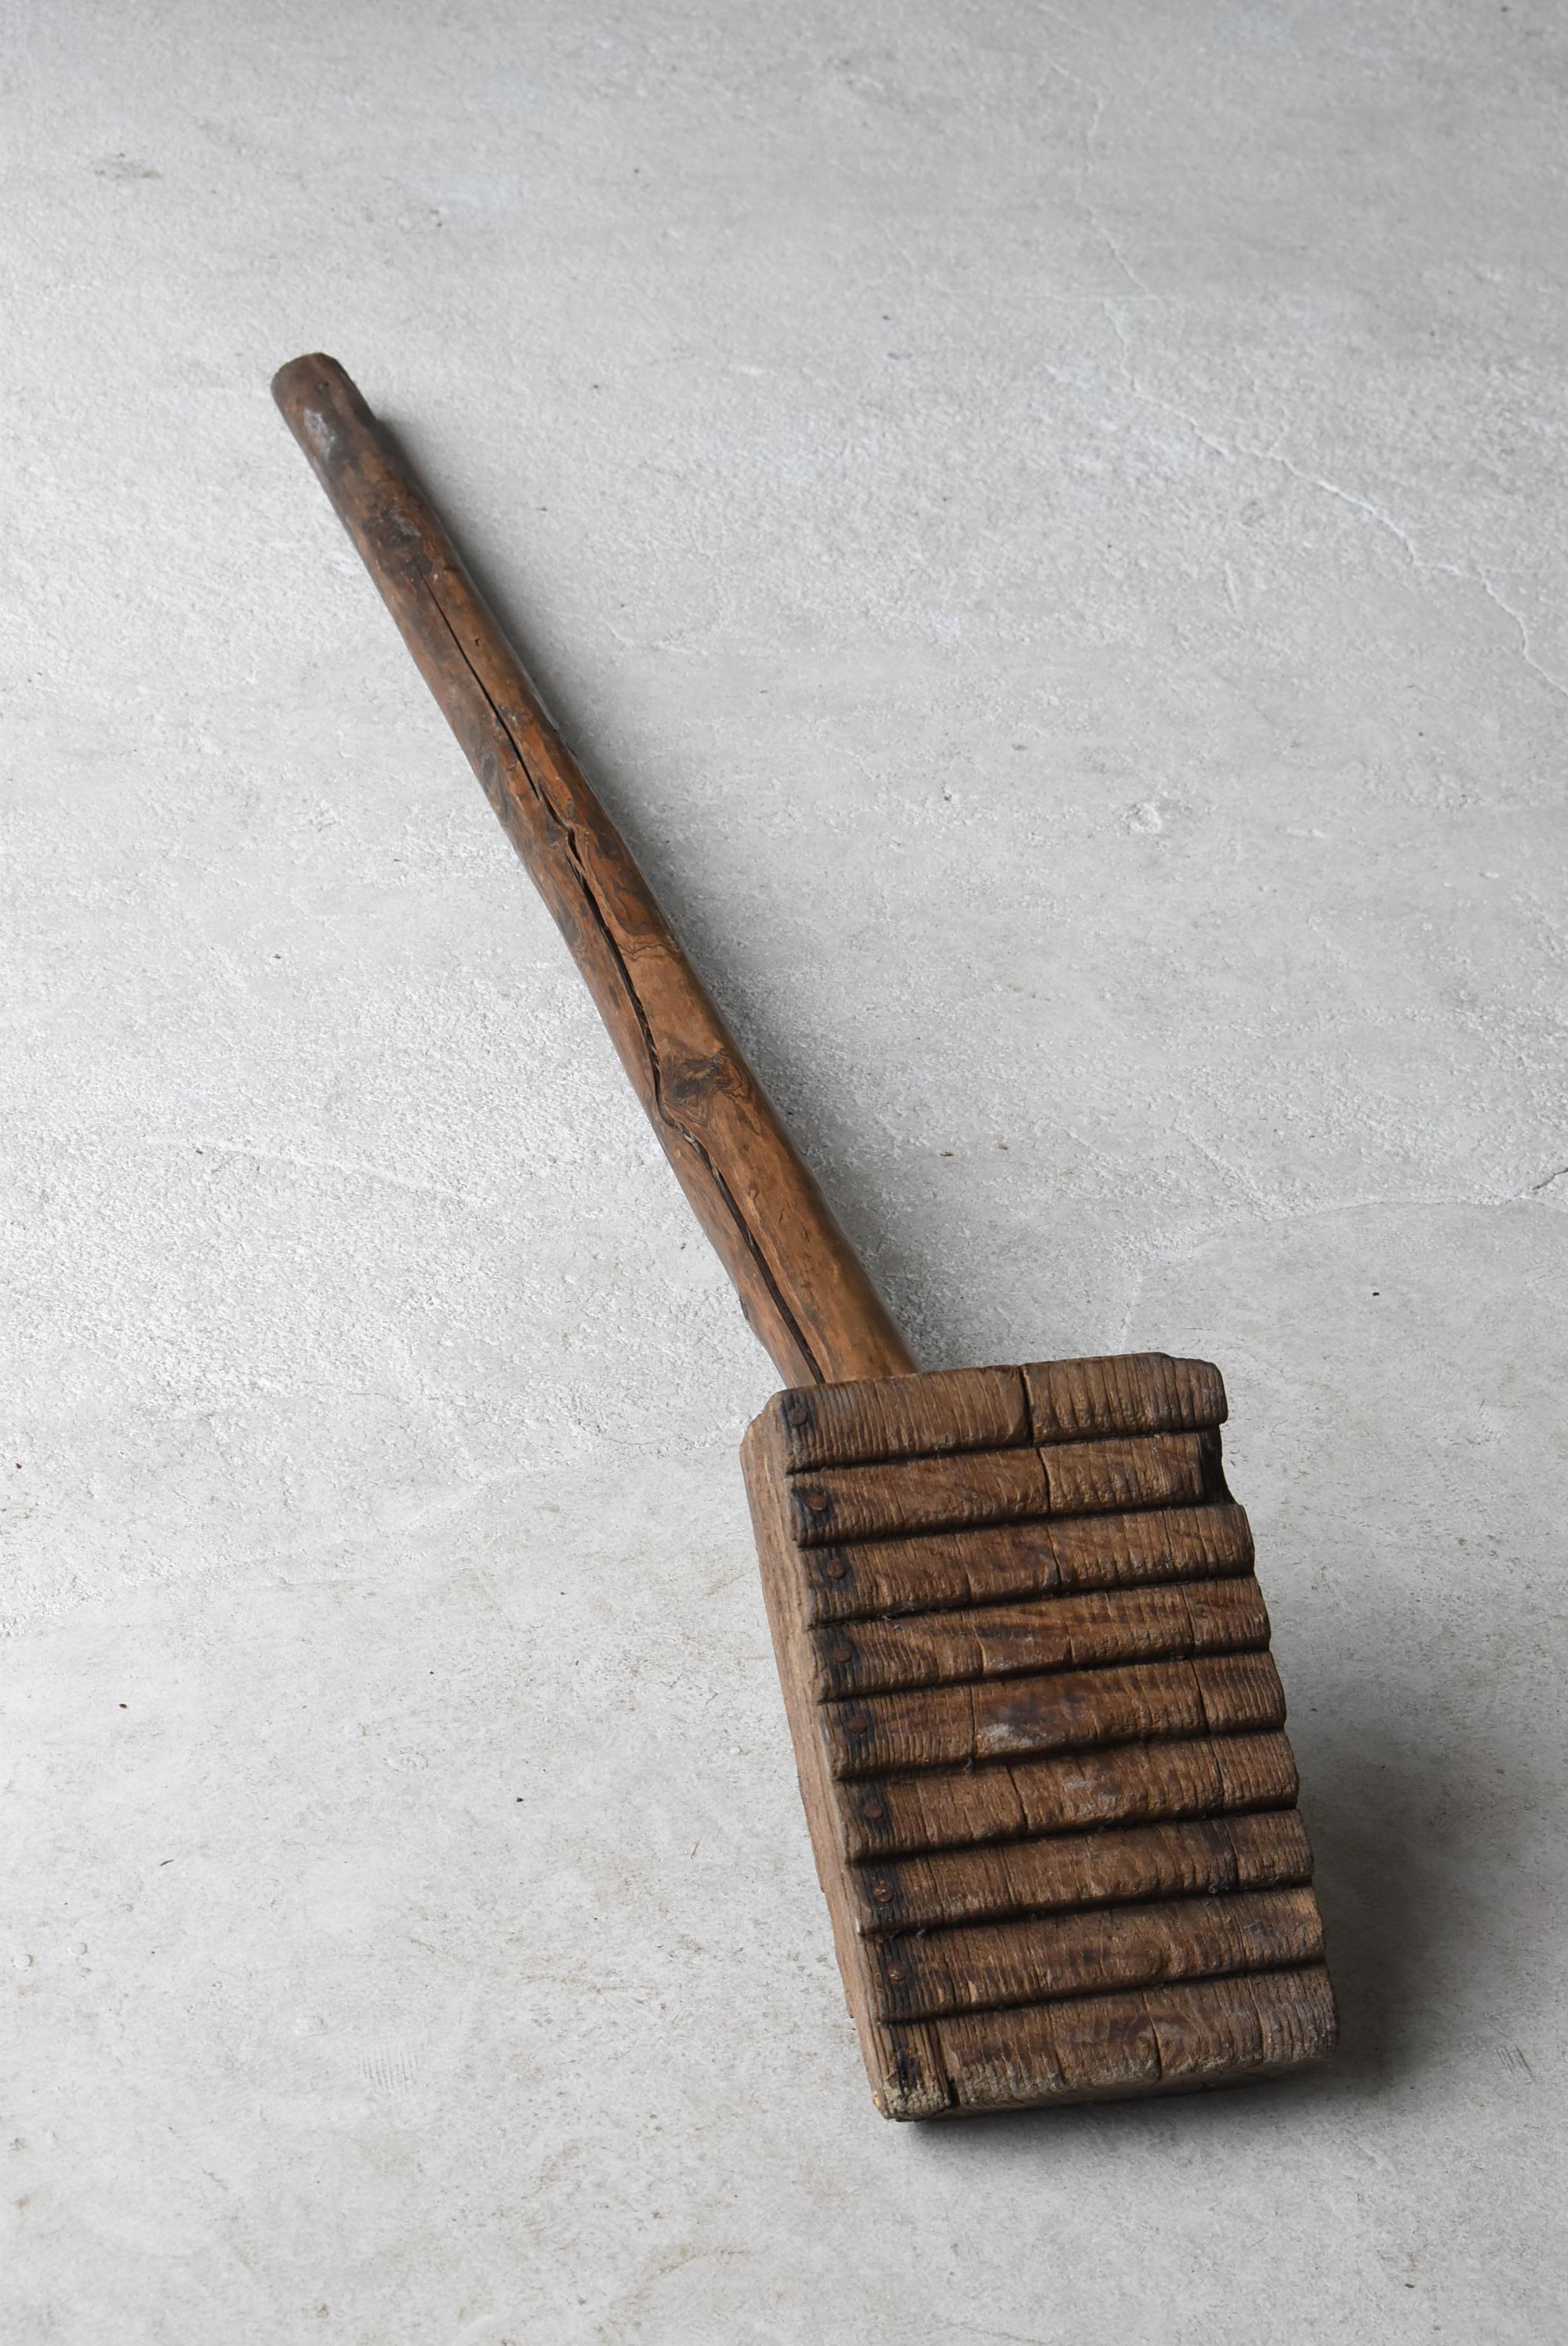 It is an old Japanese folk tool.
Probably from the Edo period.

A tool for hitting thatched roofs.

You can see that it has been used carefully.
Love is poured.

It's like a beautiful piece of art.
It is recommended.